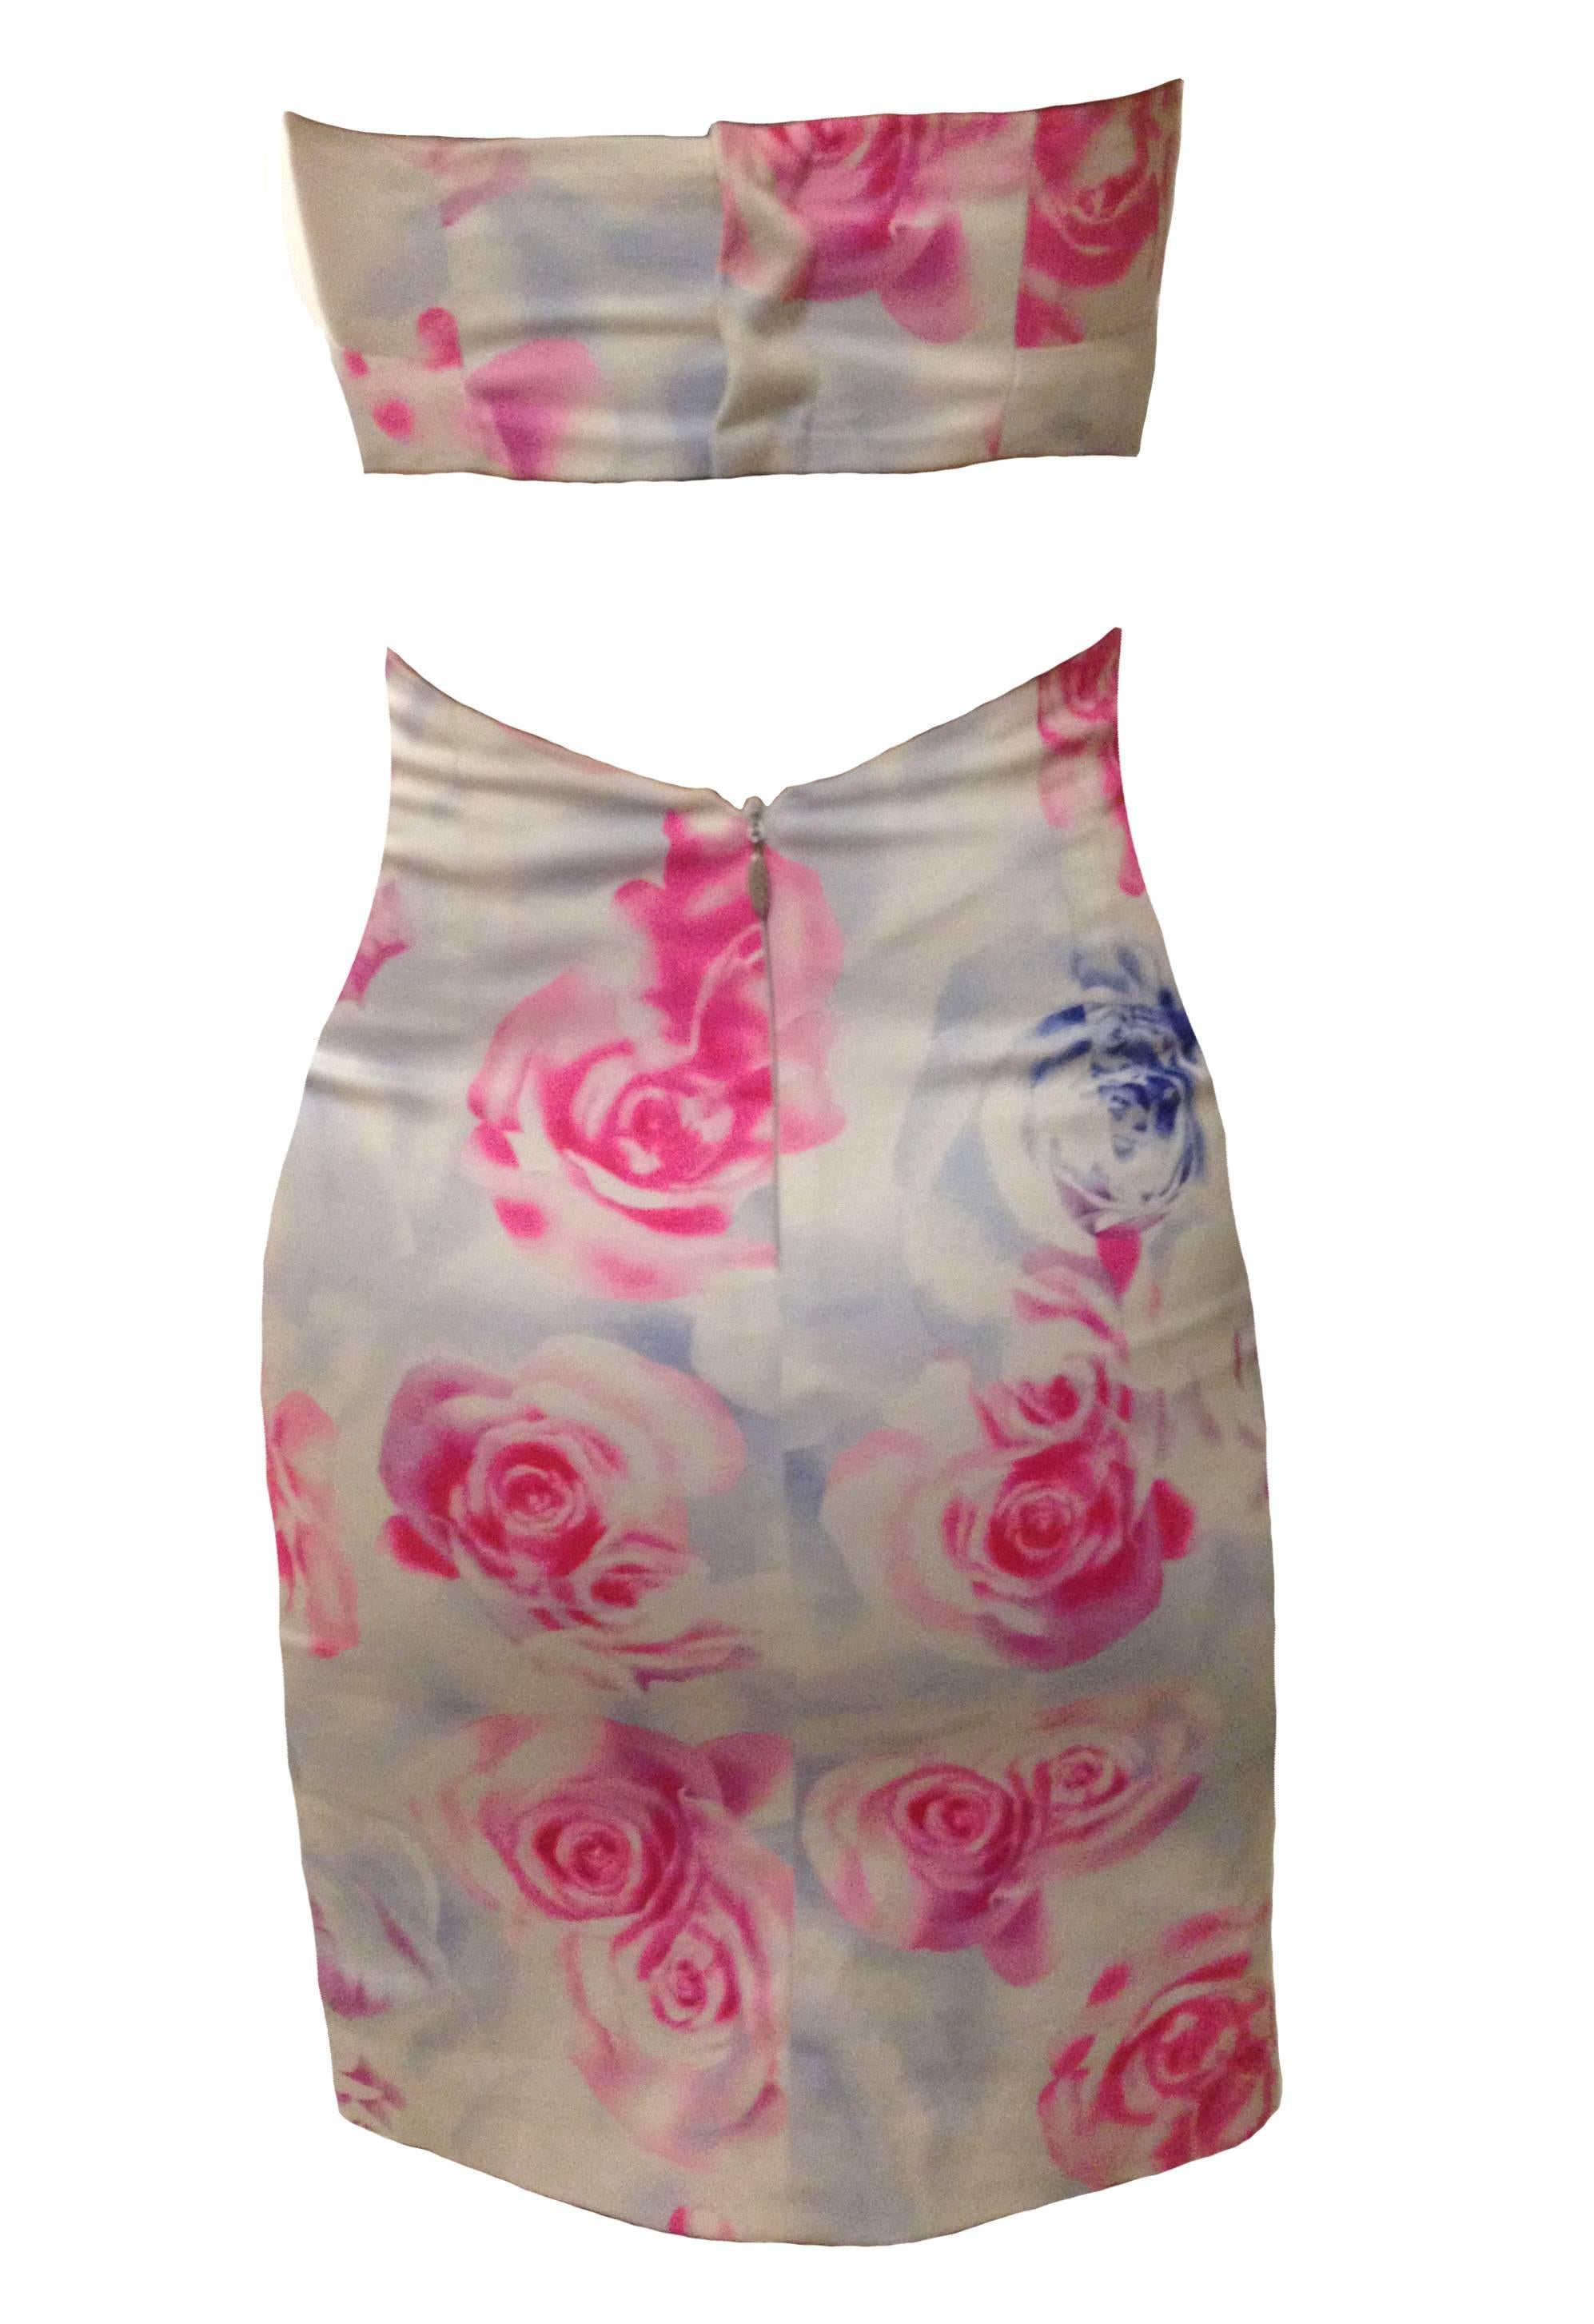 Versus by Versace pink and blue rose print body con strapless dress with cut out back detailing. Zips at back bottom, three snaps at back top. Signed 'Versus' at back zip pull. 

94% cotton, 6% spandex.
Fully lined in 55% viscose, 45%